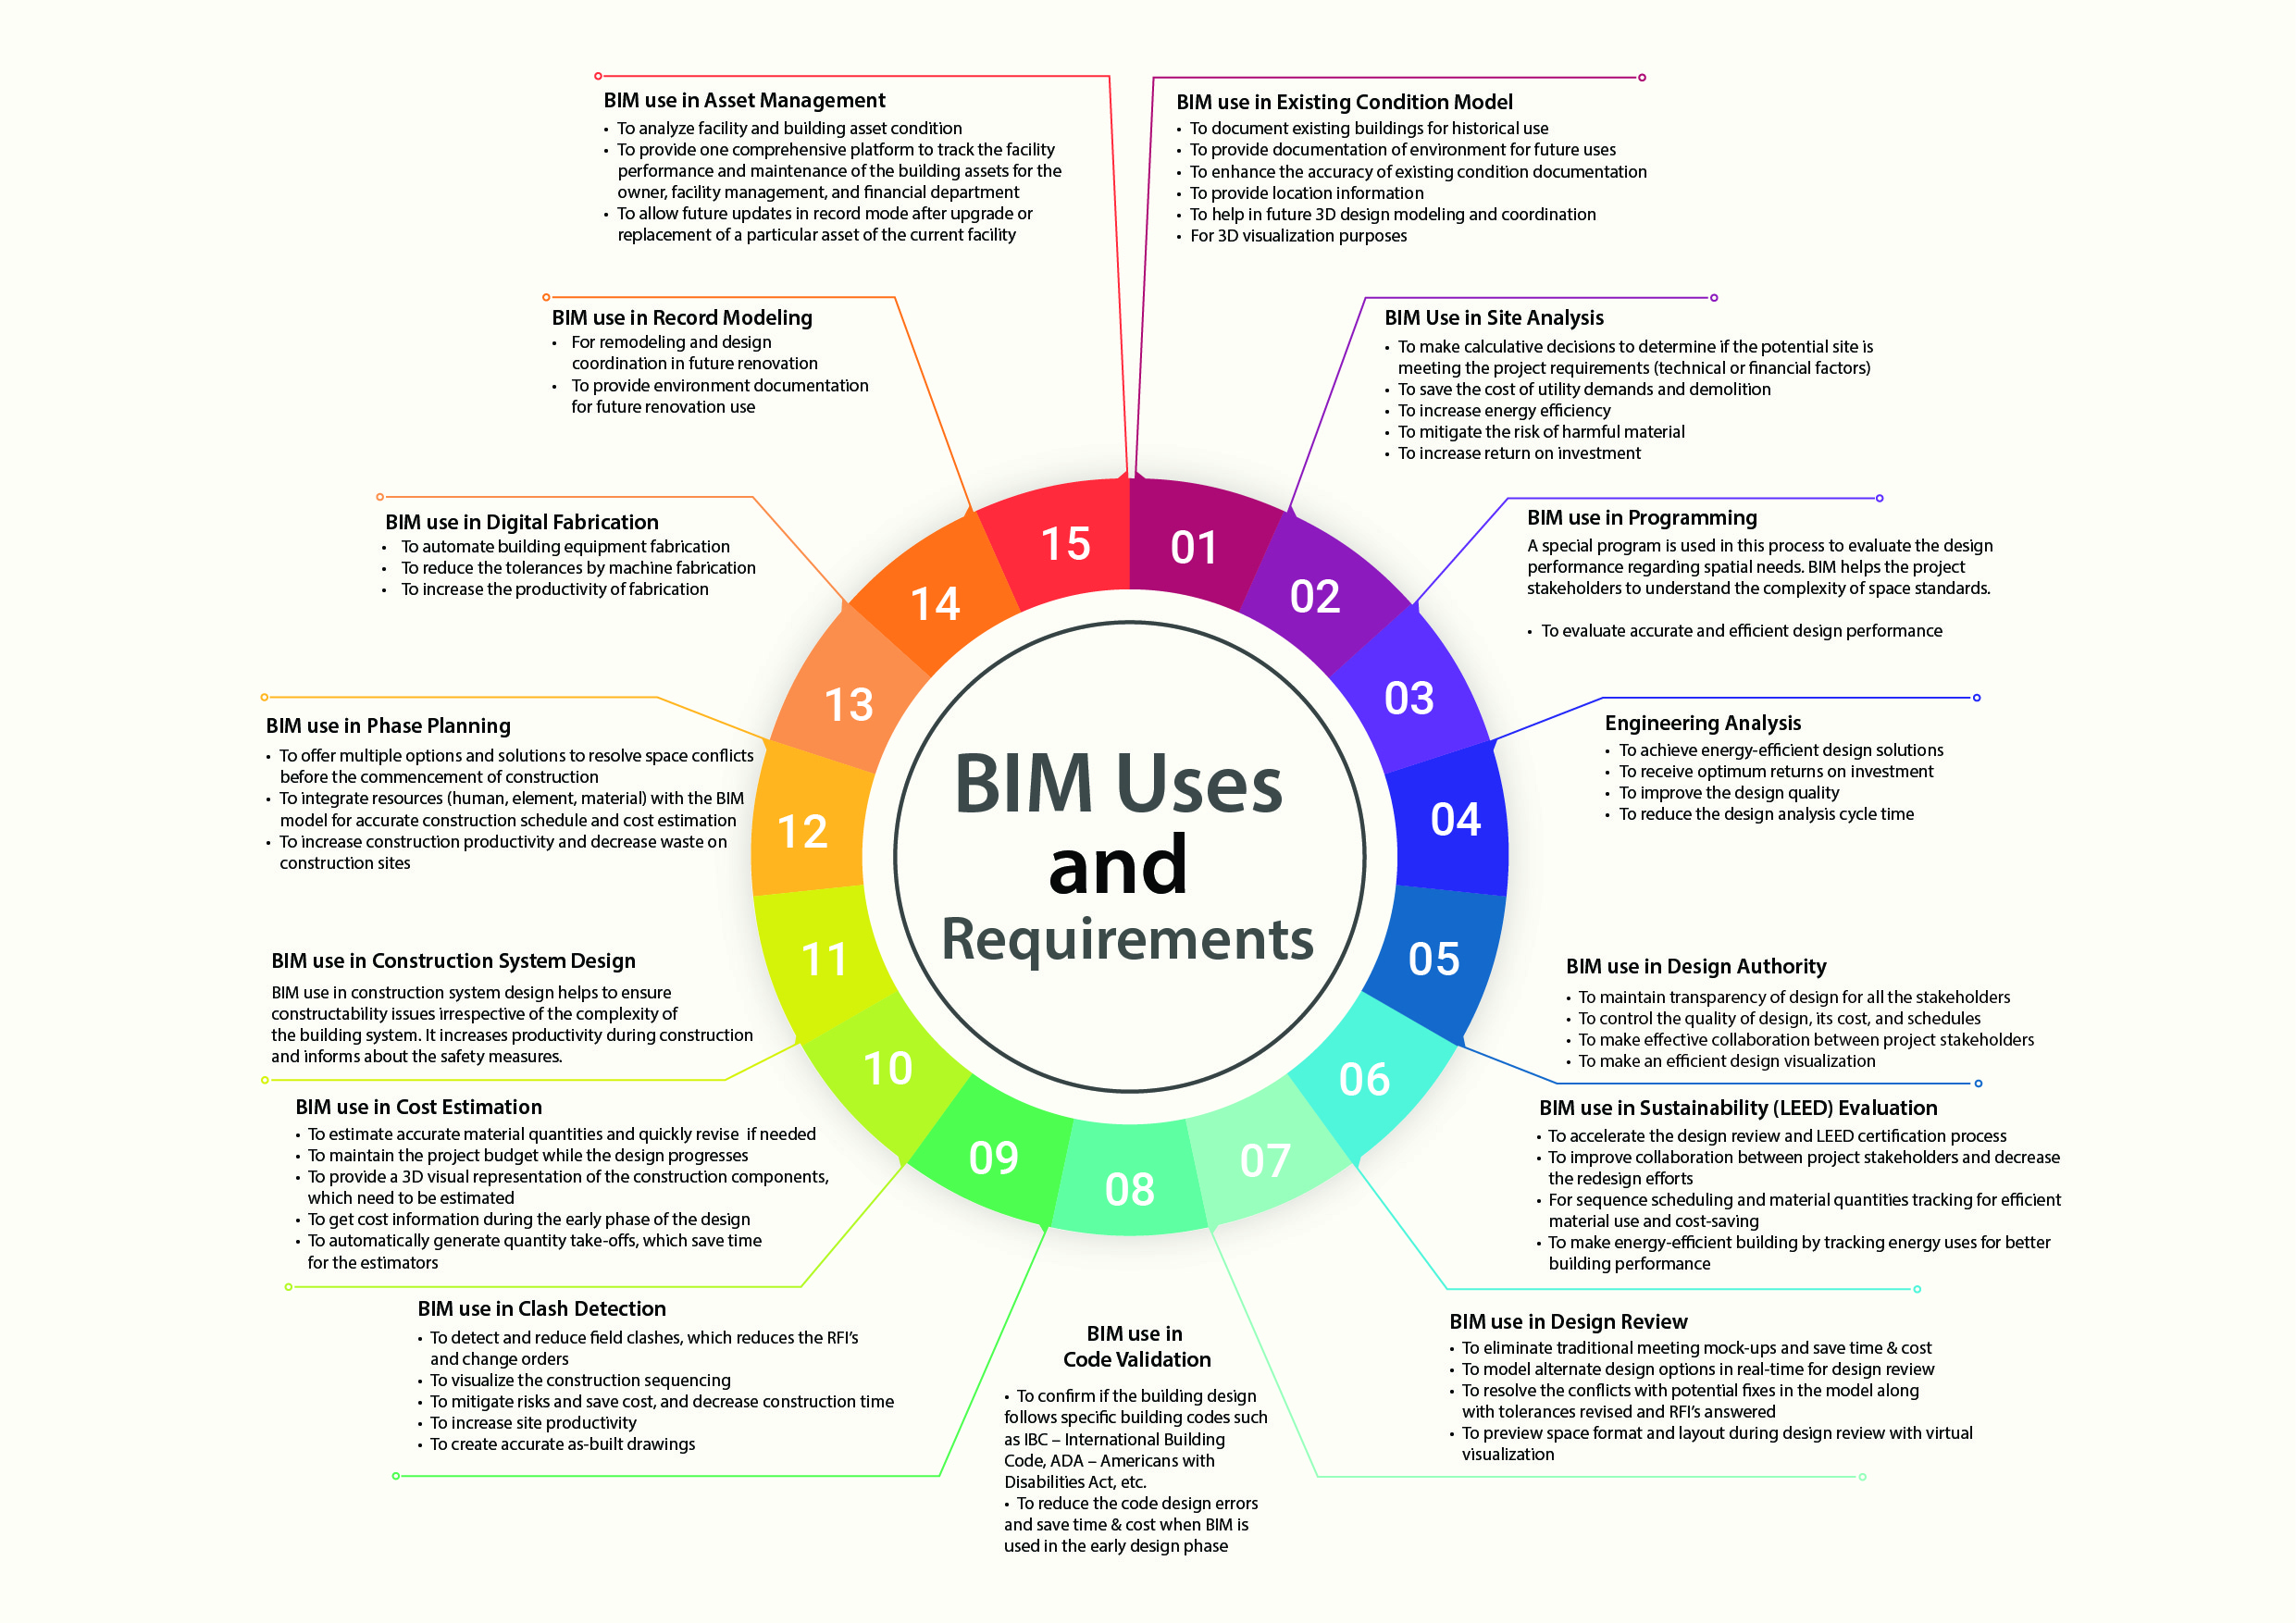 BIM Uses and Requirements by United-BIM